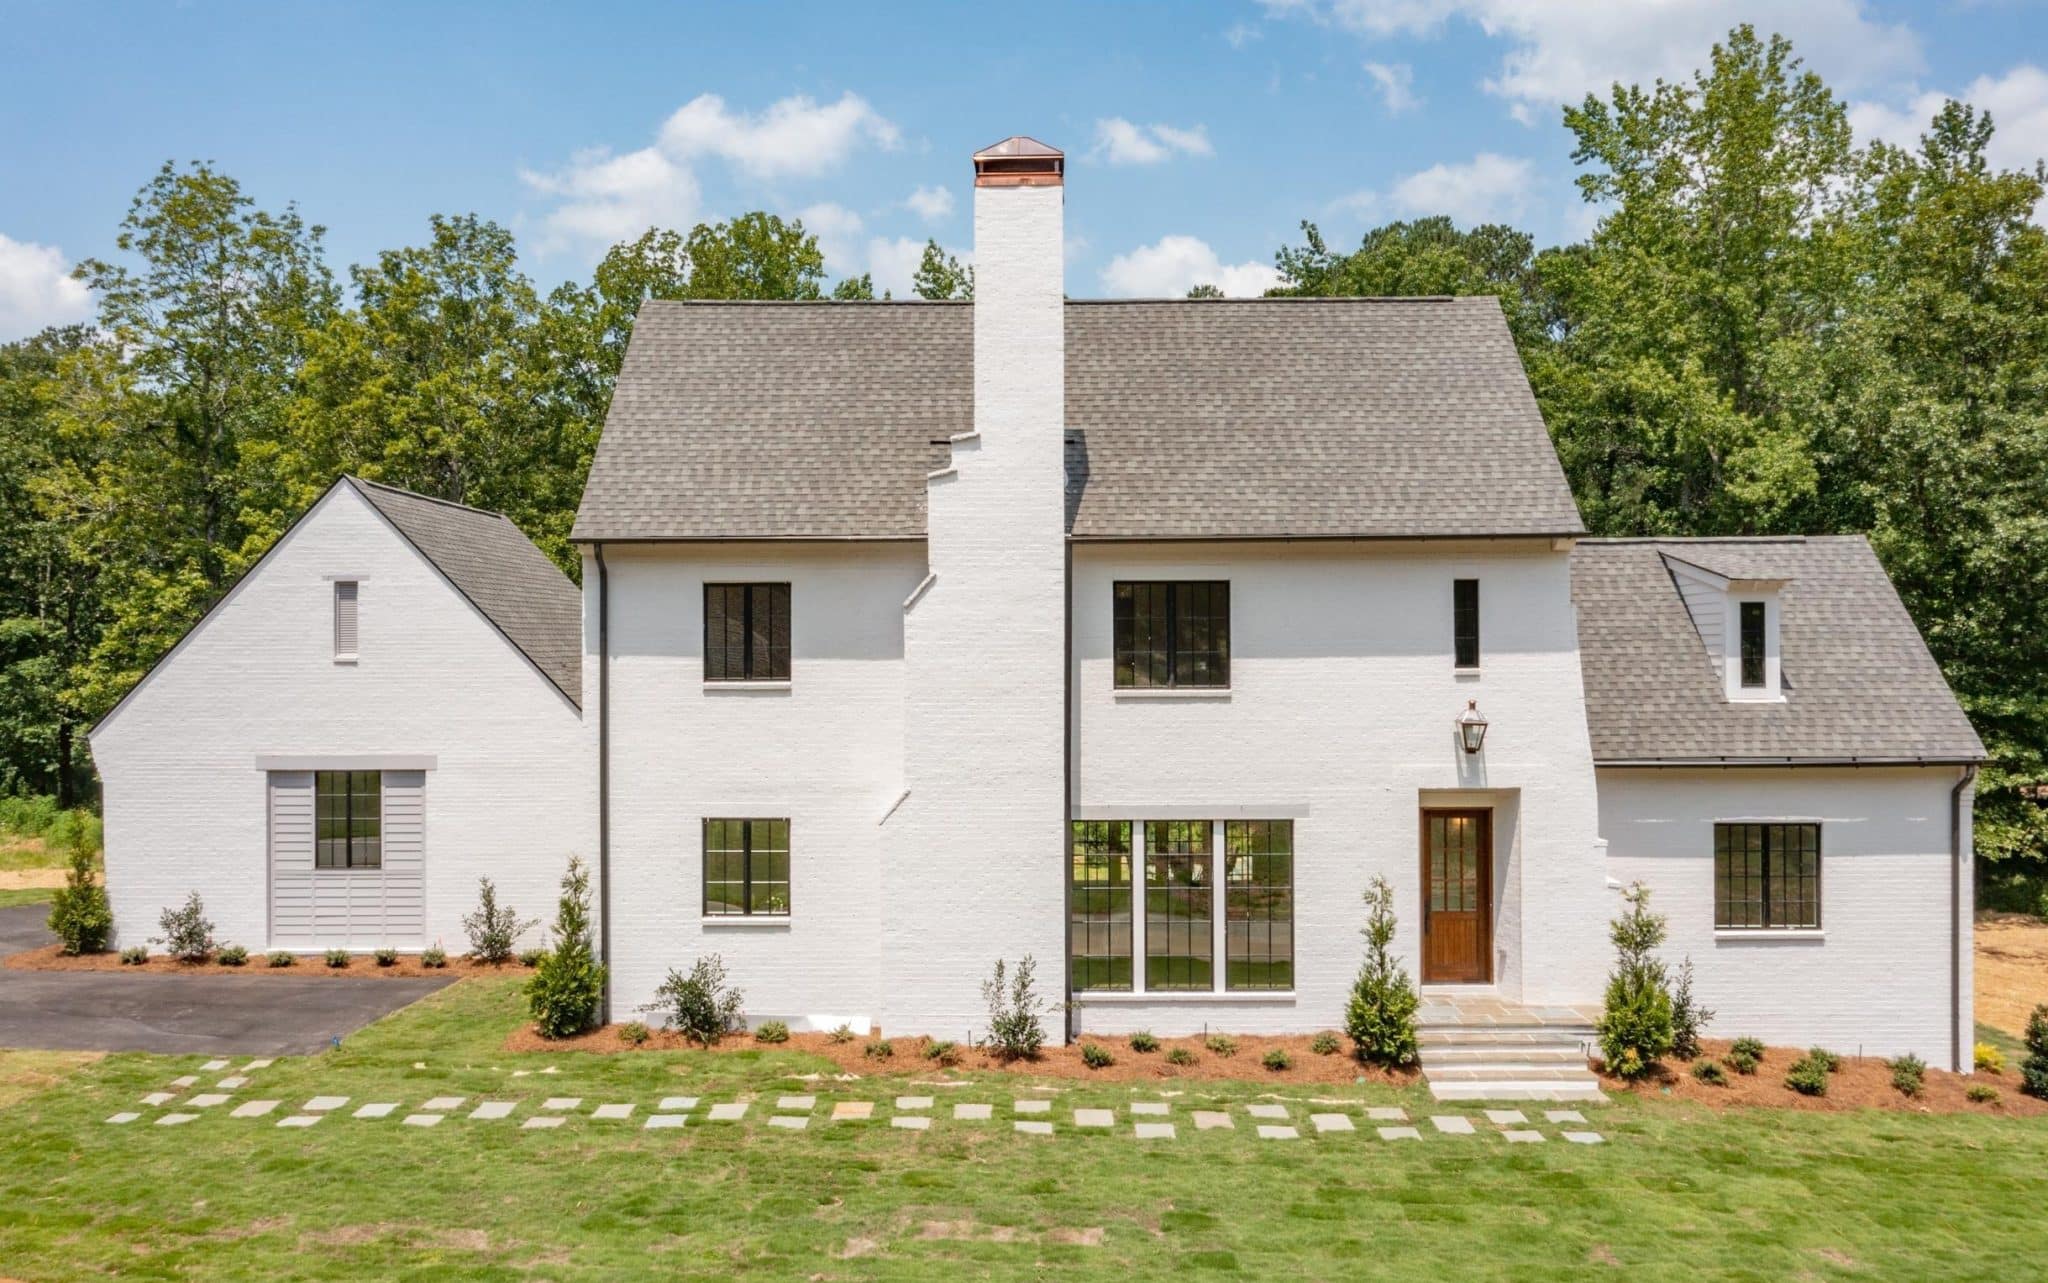 A custom home in Shoal Creek neighborhood with beautiful architectural style